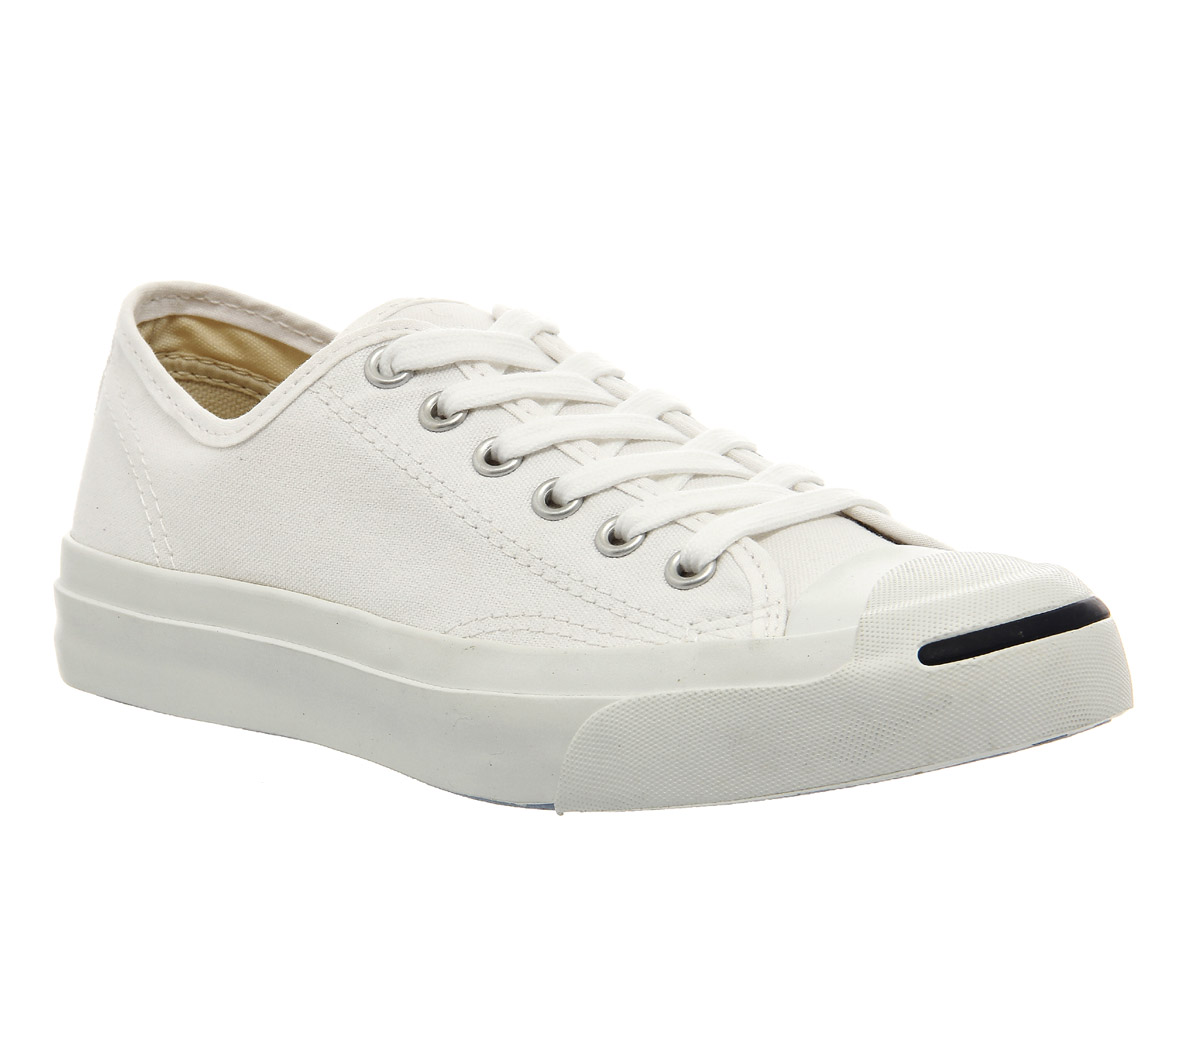 Converse Jack Purcell Jack Purcell 